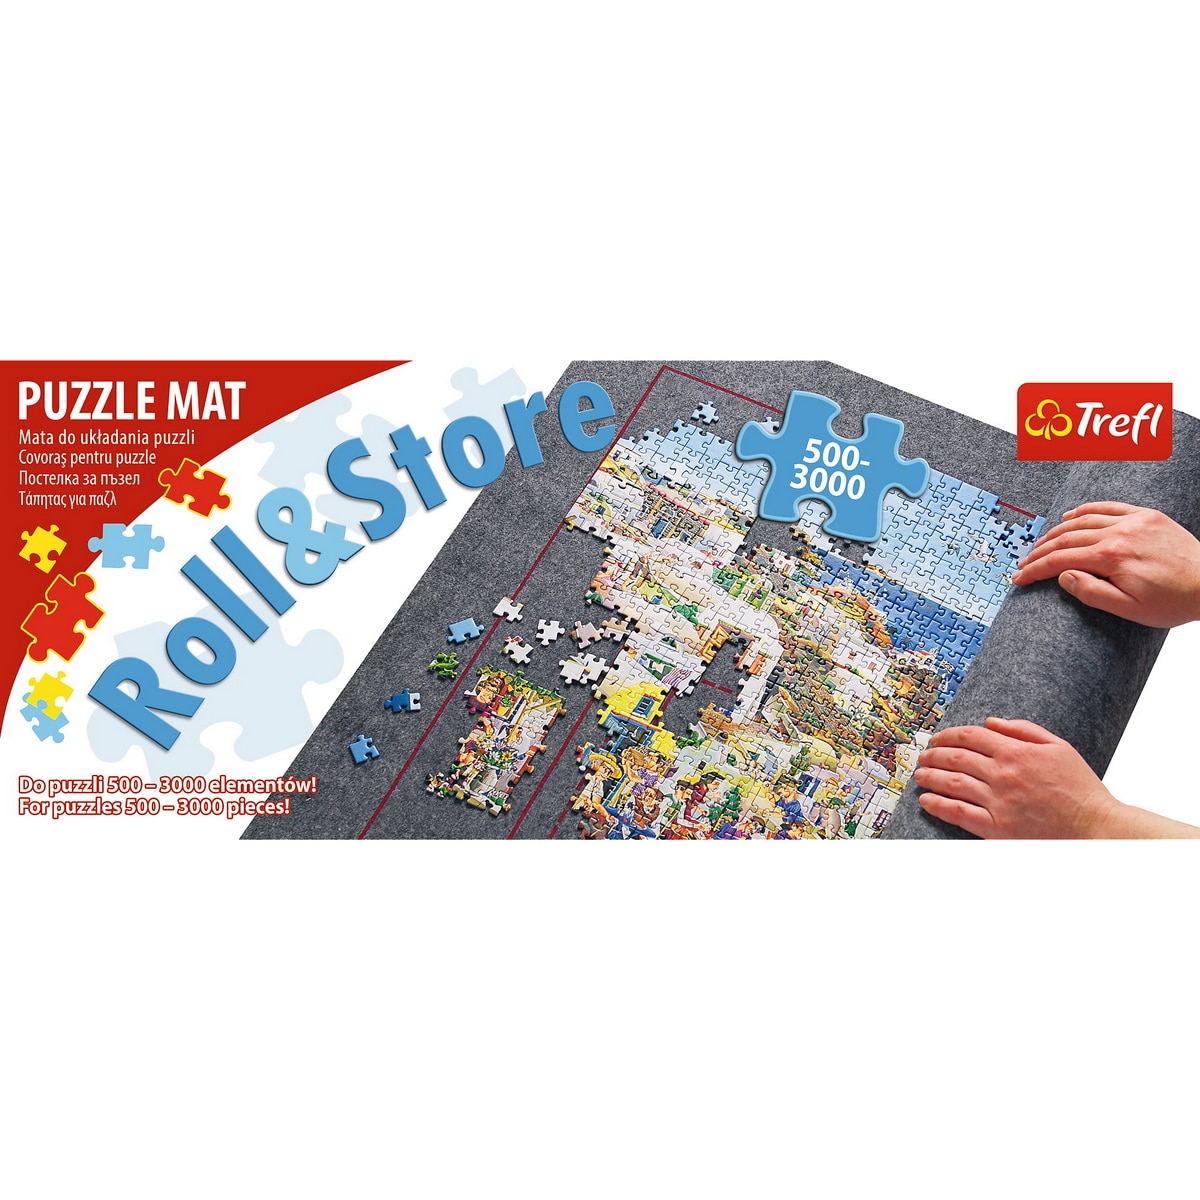 Scholar gloss Painstaking Suport puzzle Trefl - Roll&store, 500 - 3000 piese - eMAG.ro